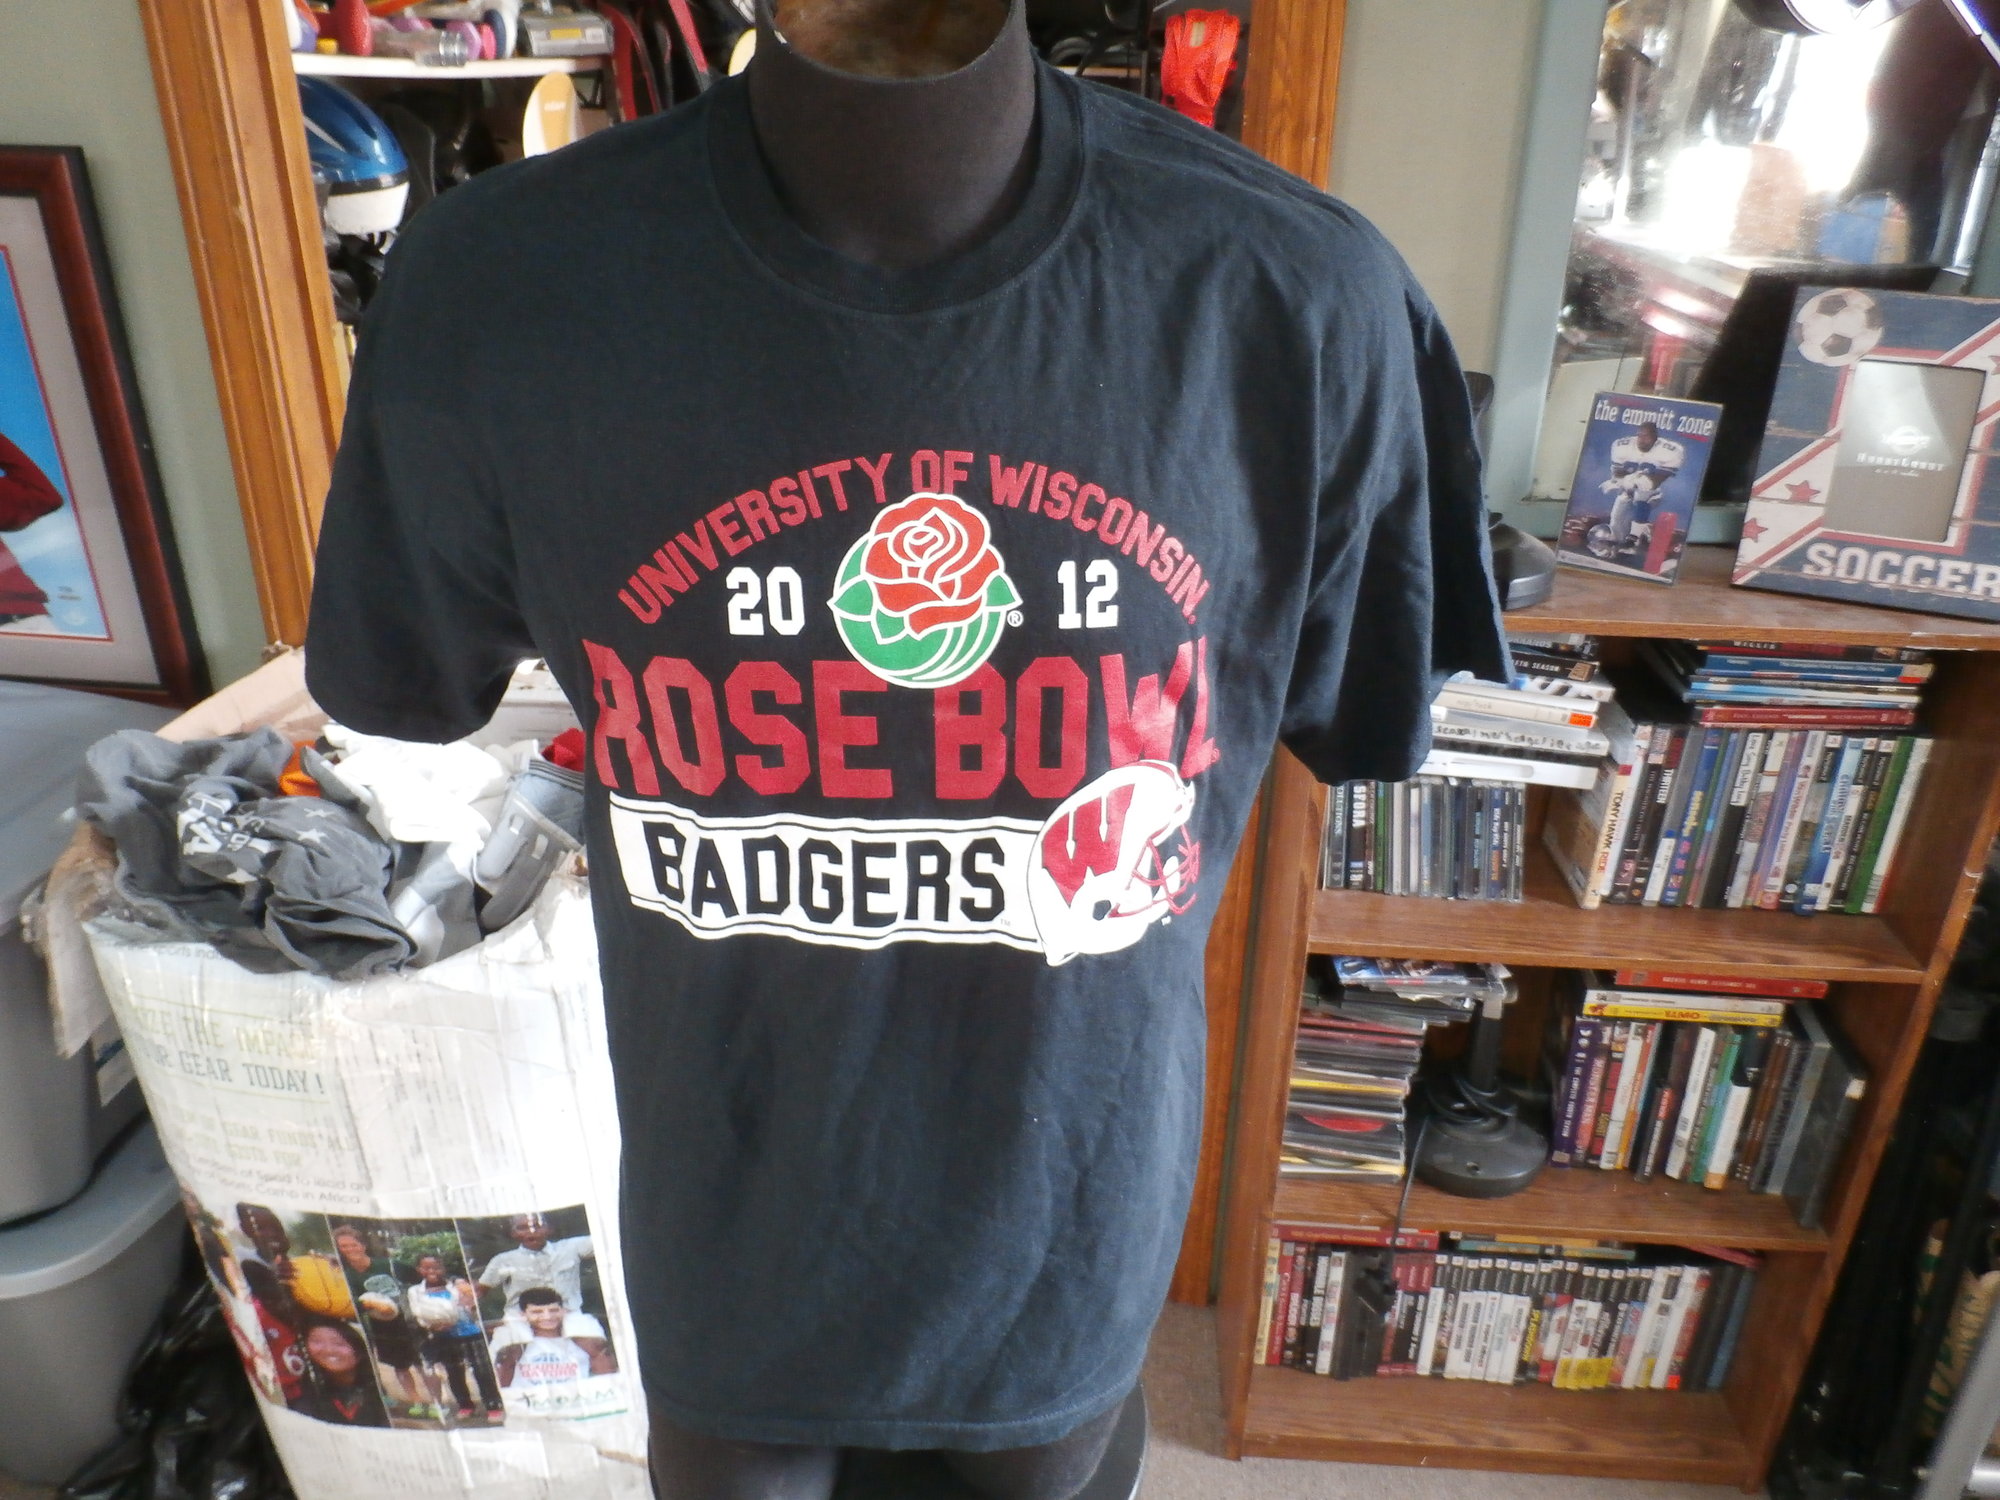 Wisconsin Badgers 2012 Rose Bowl black Gildan shirt size Large with tags #27429
Rating: (see below) 1- Excellent Condition
Team: Wisconsin Badgers
Player: n/a
Brand: Gildan
Size: Men's Large- (Measured Flat: Across chest 22\"; Length 29\")
Measured Flat: underarm to underarm; top of shoulder to bottom hem
Color: black
Style: short sleeve; screen printed
Material: 100% cotton
Condition: 1- Excellent Condition: Like new; tags still attached (see photos)
Item #: 27429
Shipping: FREE